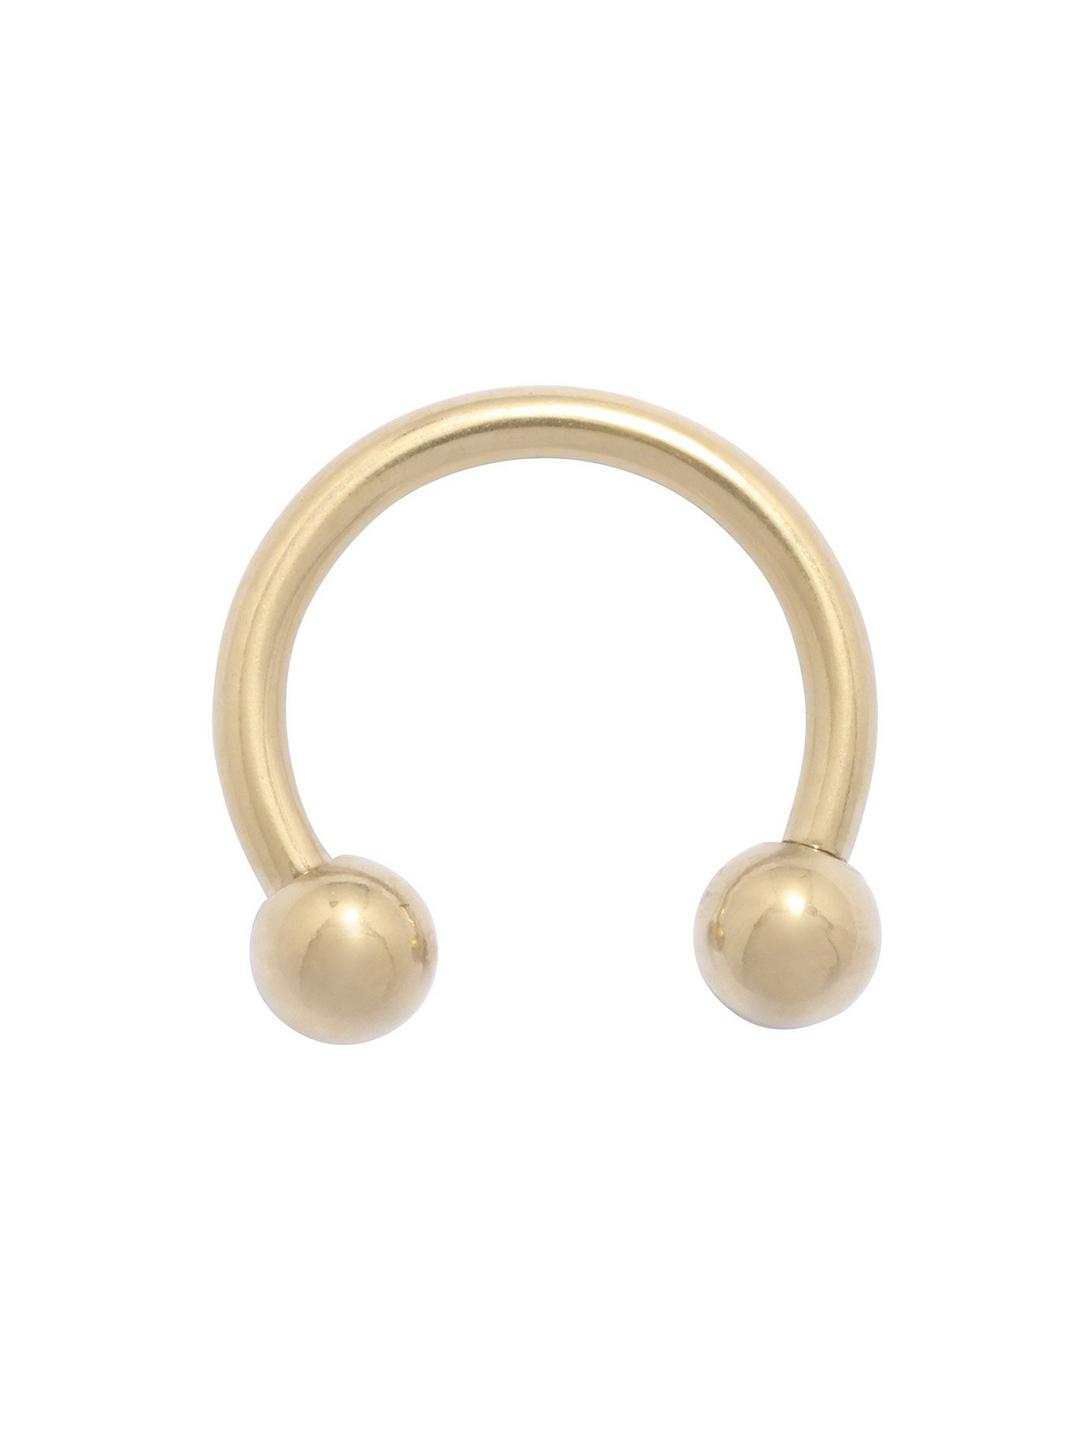 5/16 Gold Plated Surgical Steel Circular Barbell, GOLD, hi-res